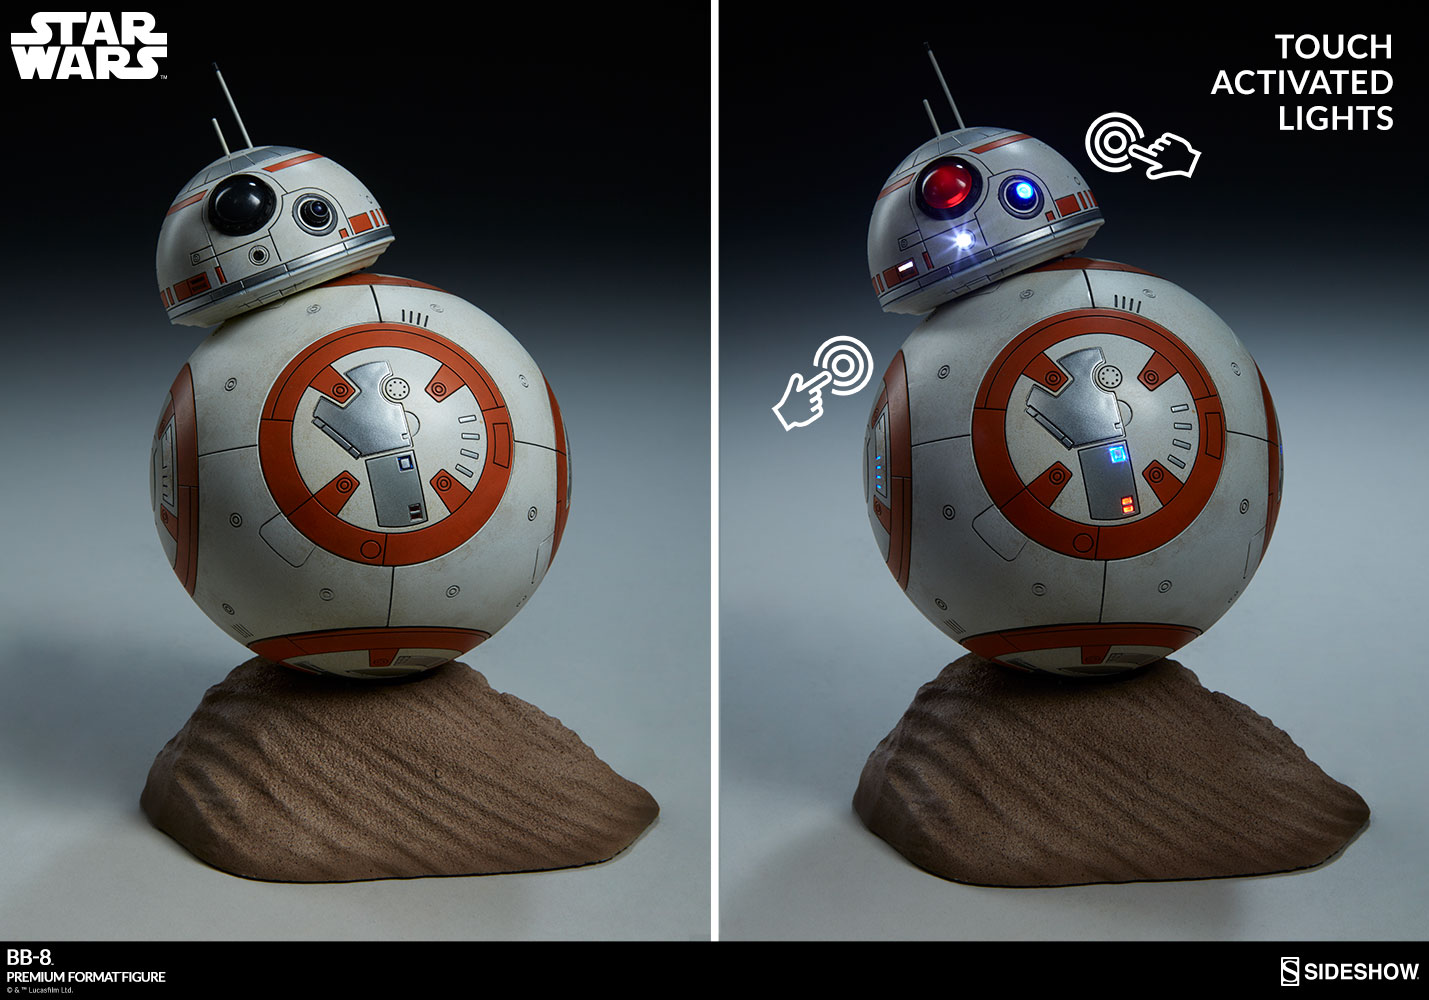 Star Wars BB-8 Premium Format(TM) Figure by Sideshow Collect 